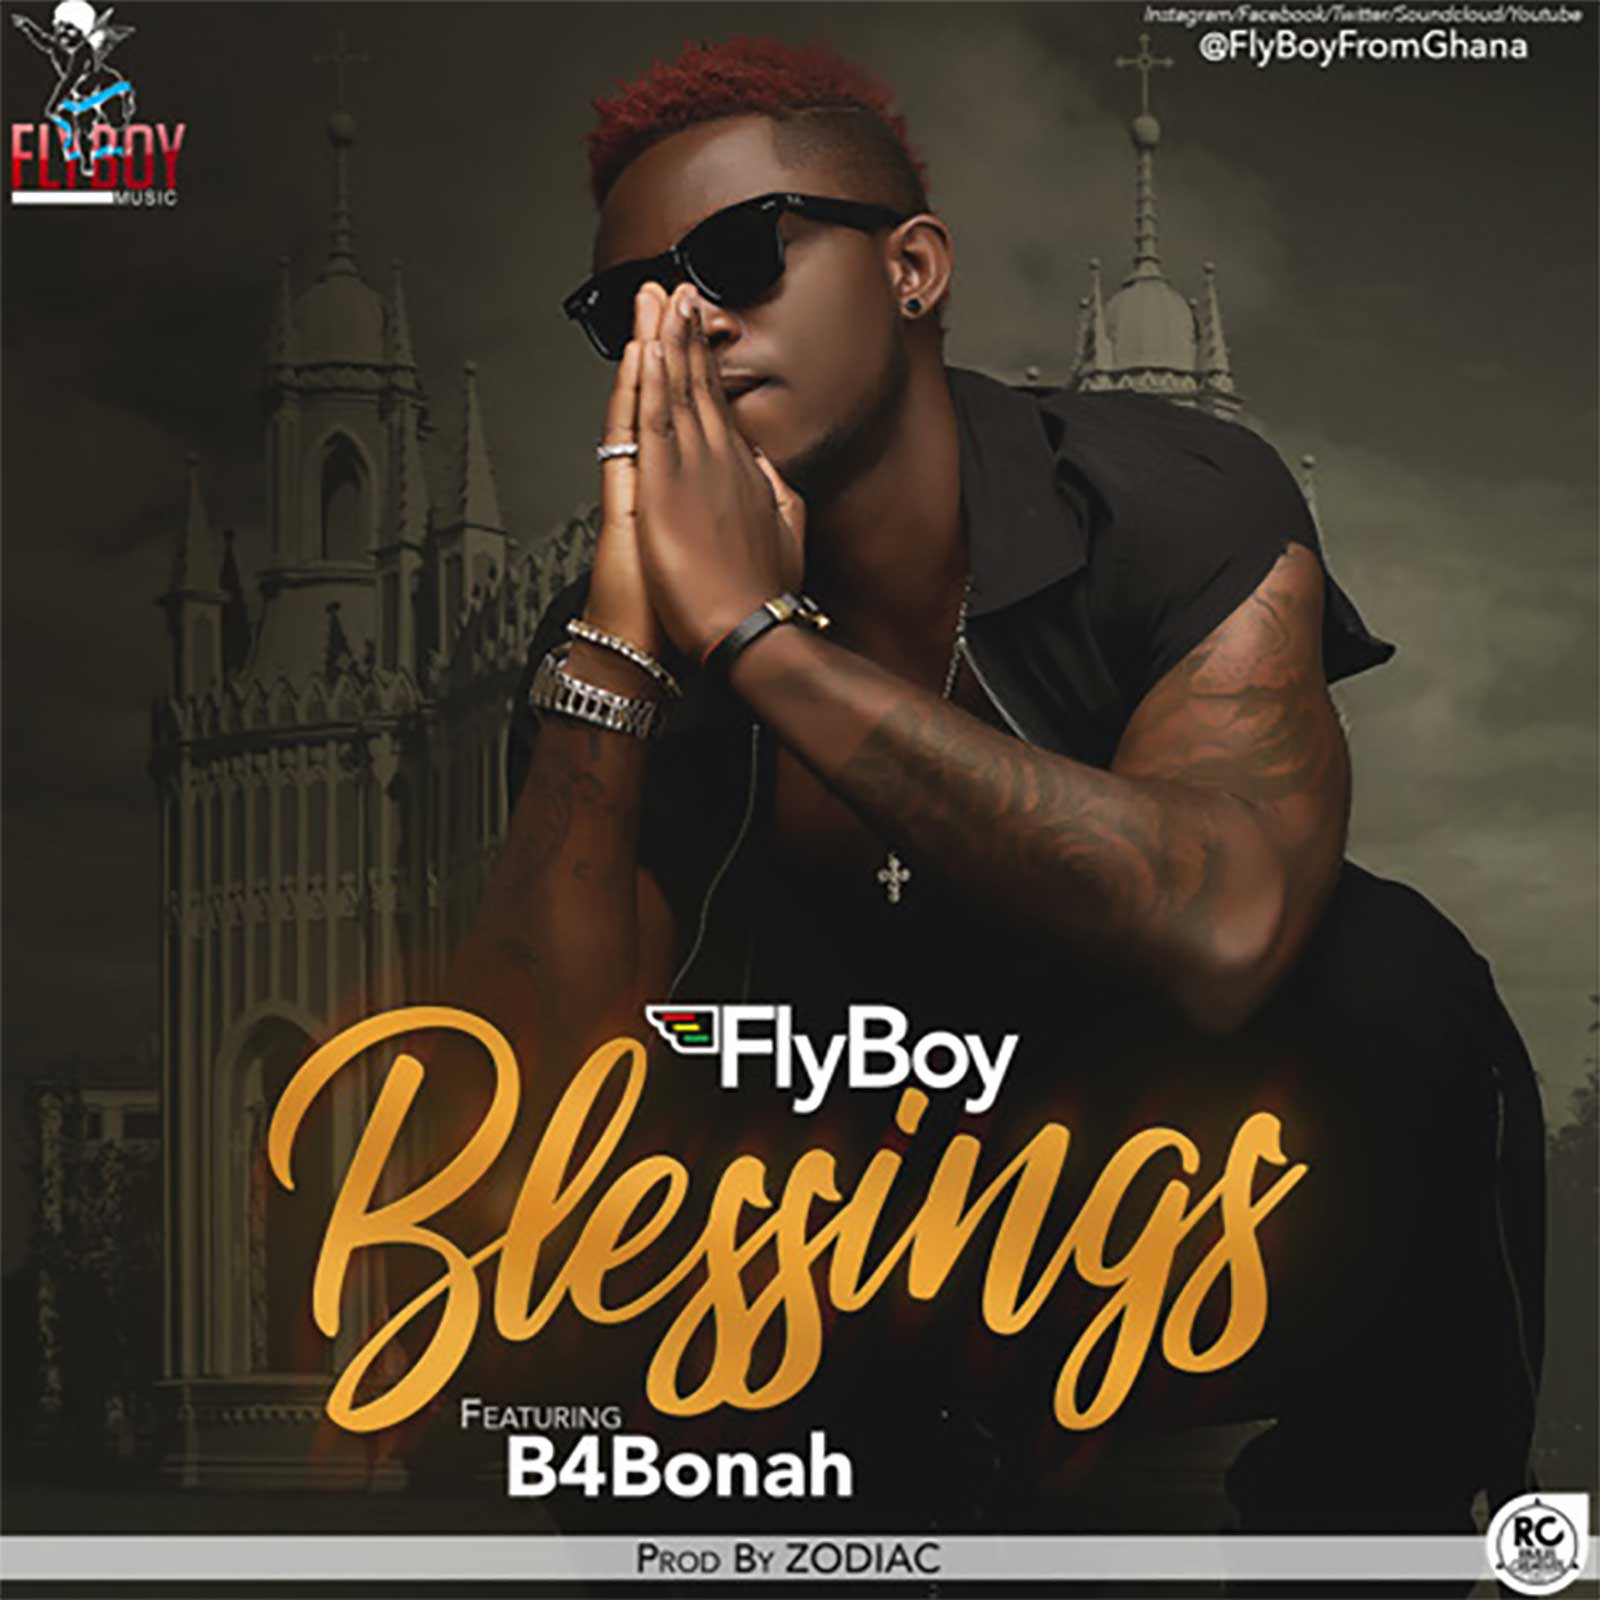 Blessings by FlyBoy feat. B4Bonah